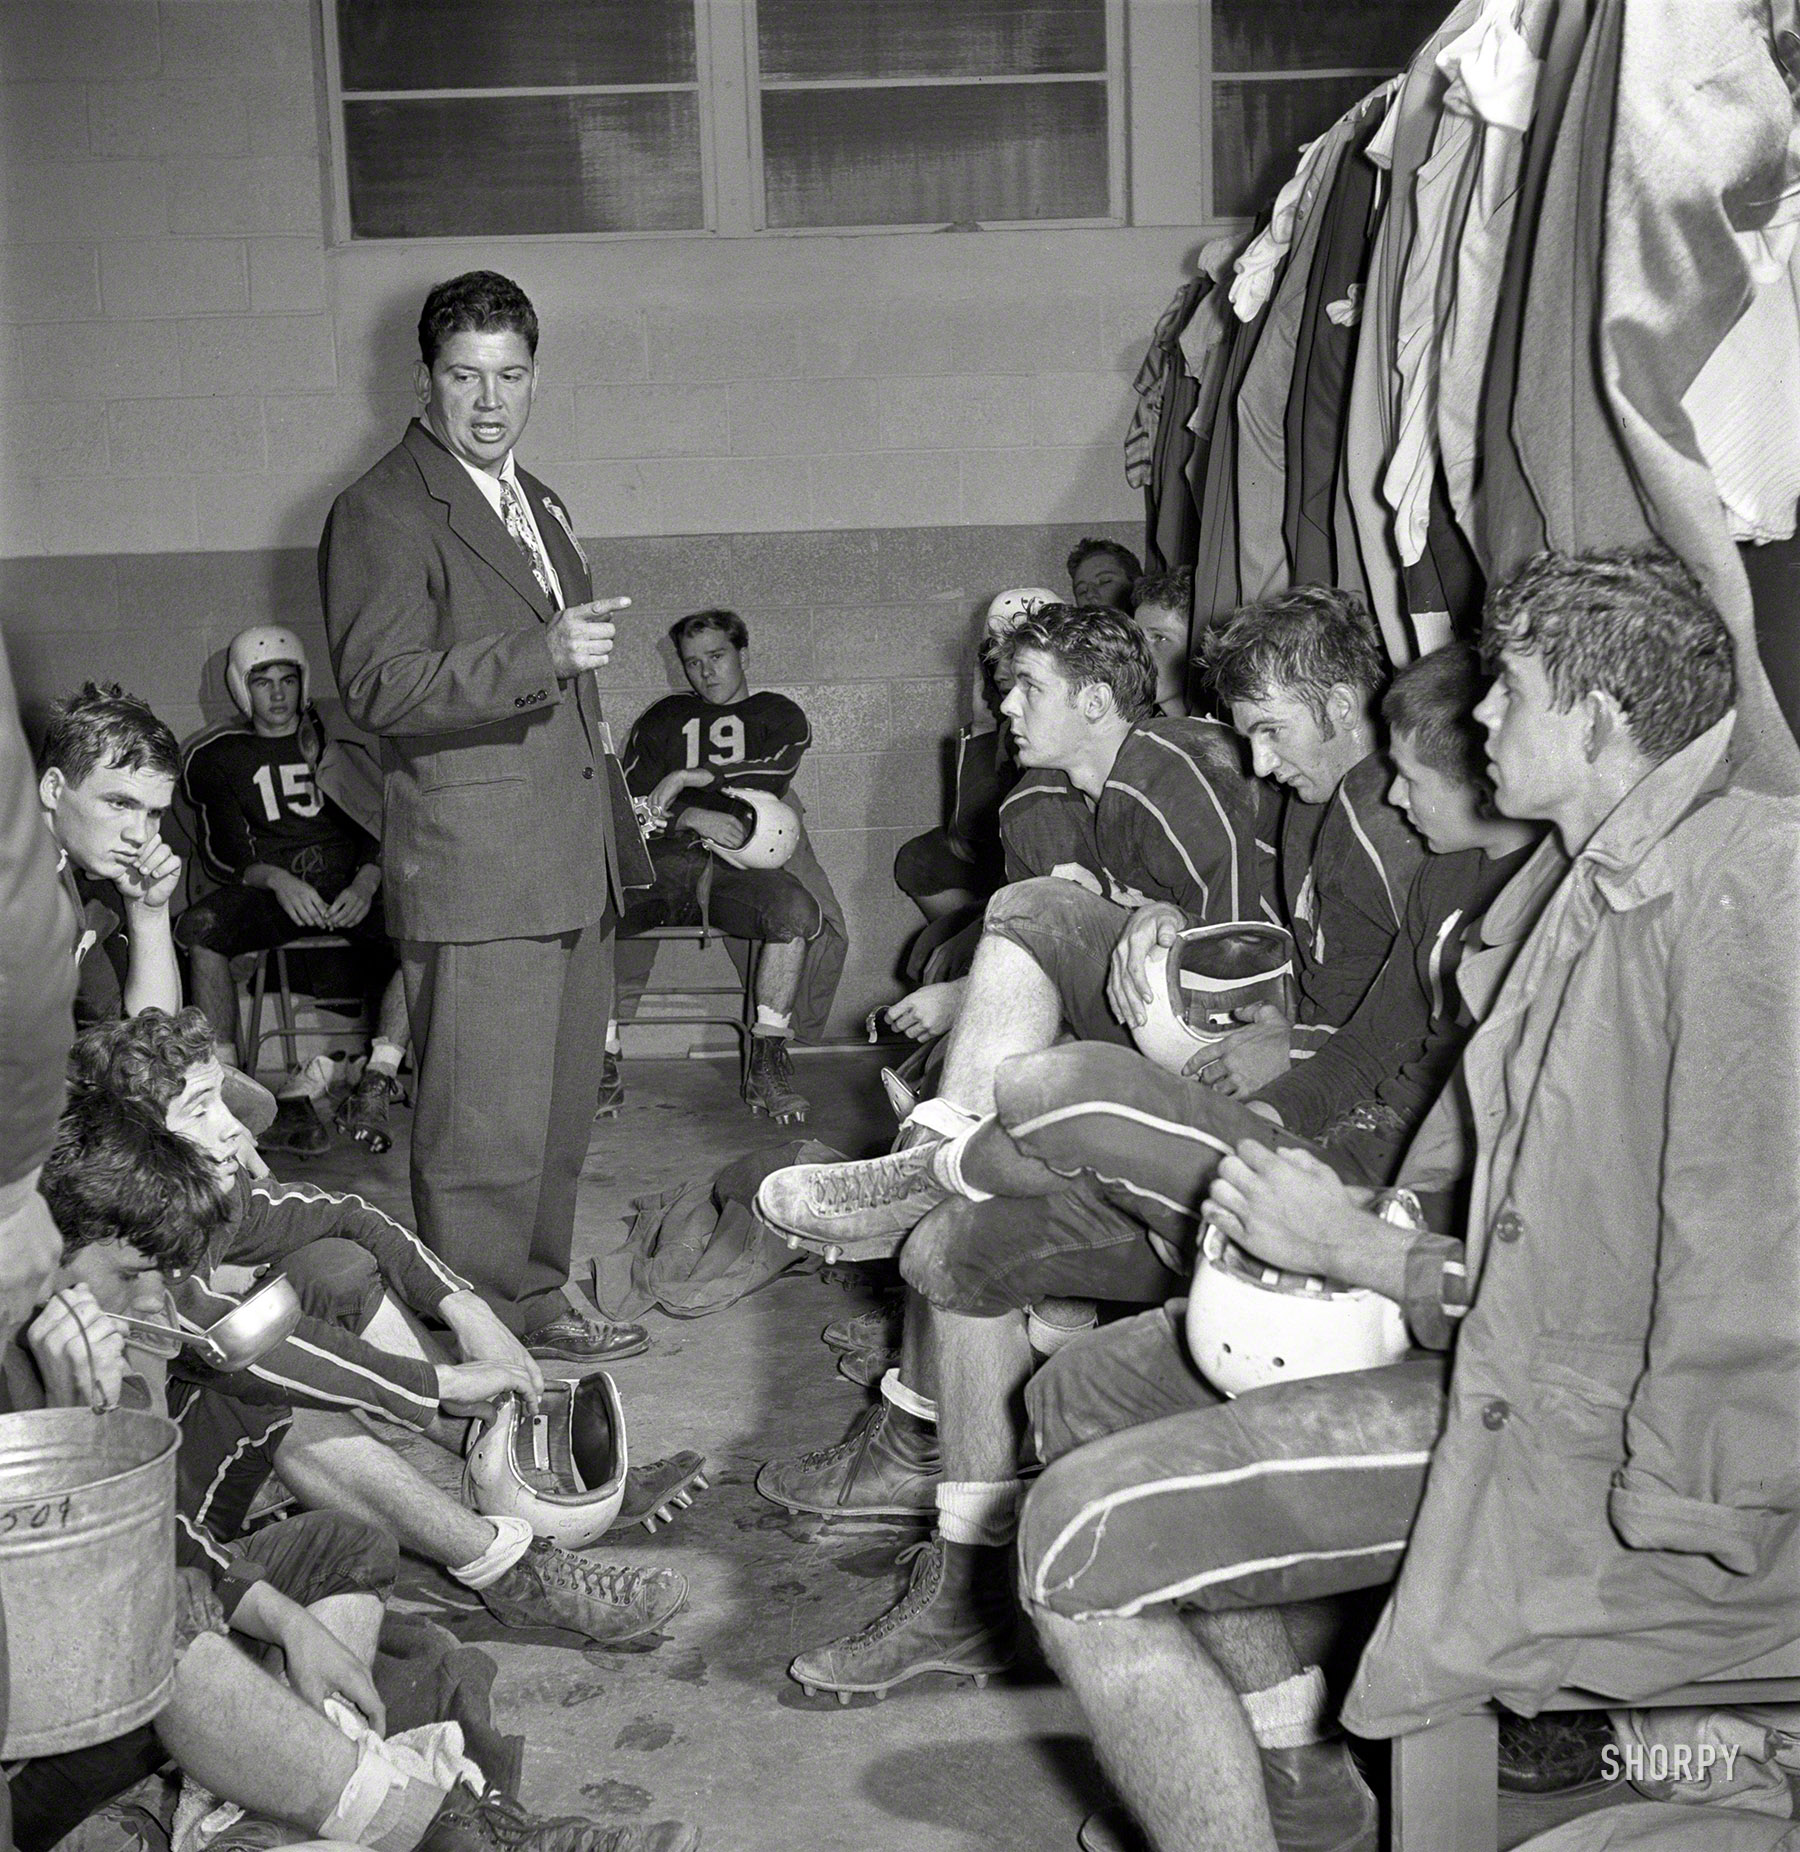 November 1952. A pep talk from Coach. "Hamlet (North Carolina) High School football team in locker room at away game." From photos by Douglas Jones for the Look magazine assignment "Football Weekend." View full size.